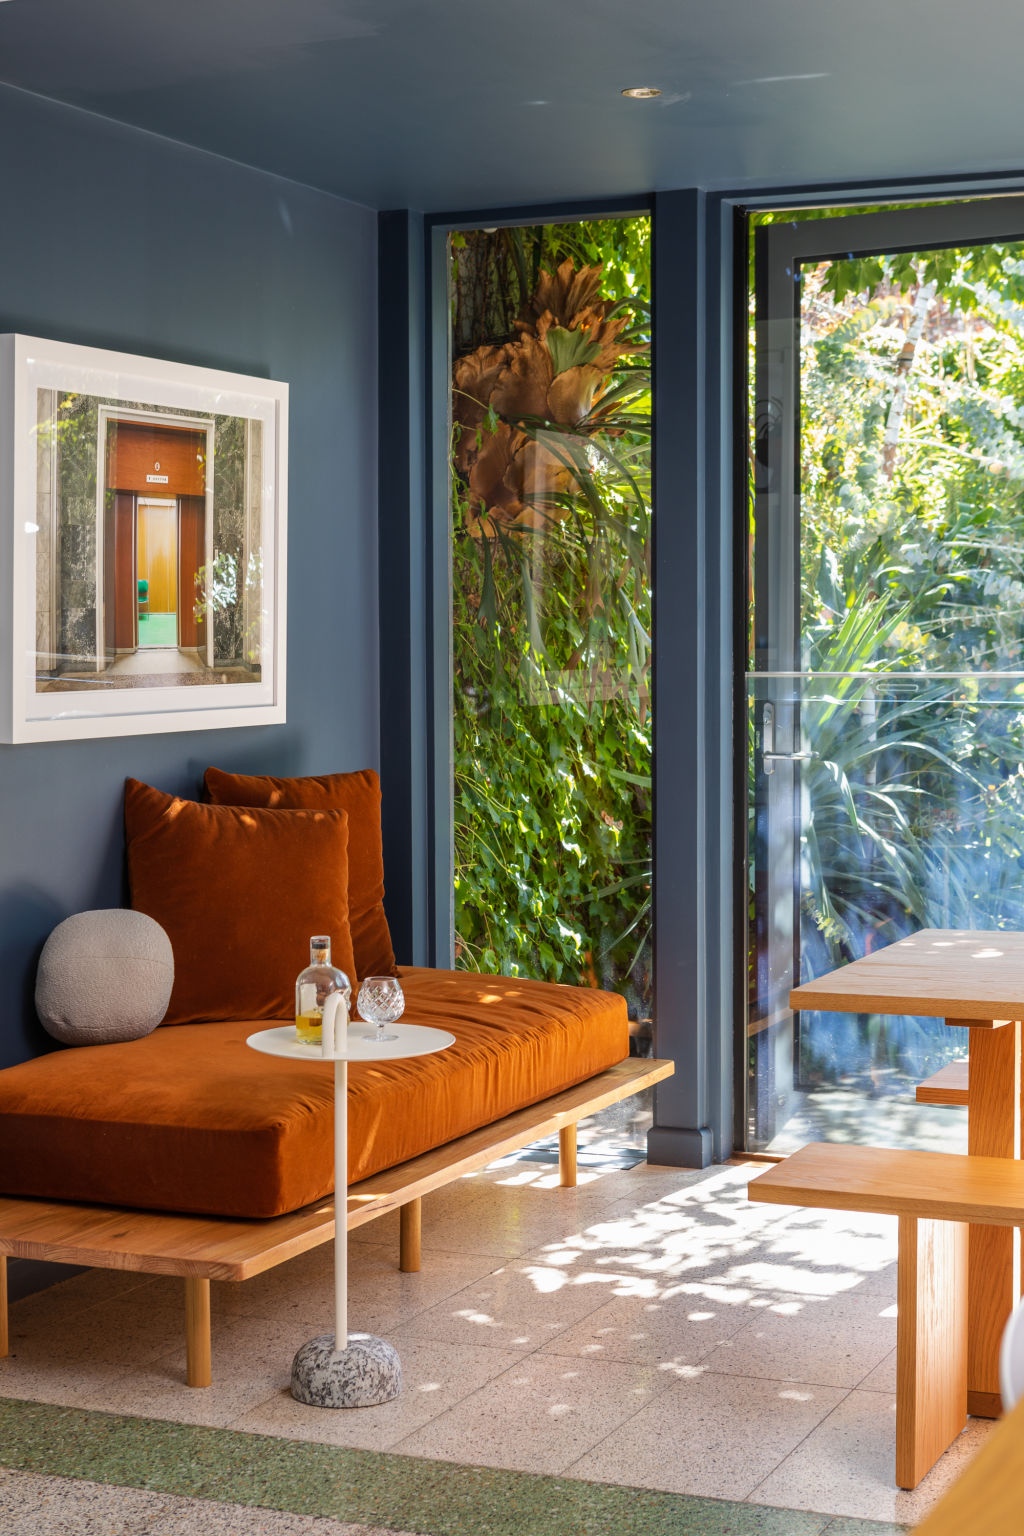 The dining area is bathed in natural light, thanks to the north-facing backyard. Photo: Greg Briggs